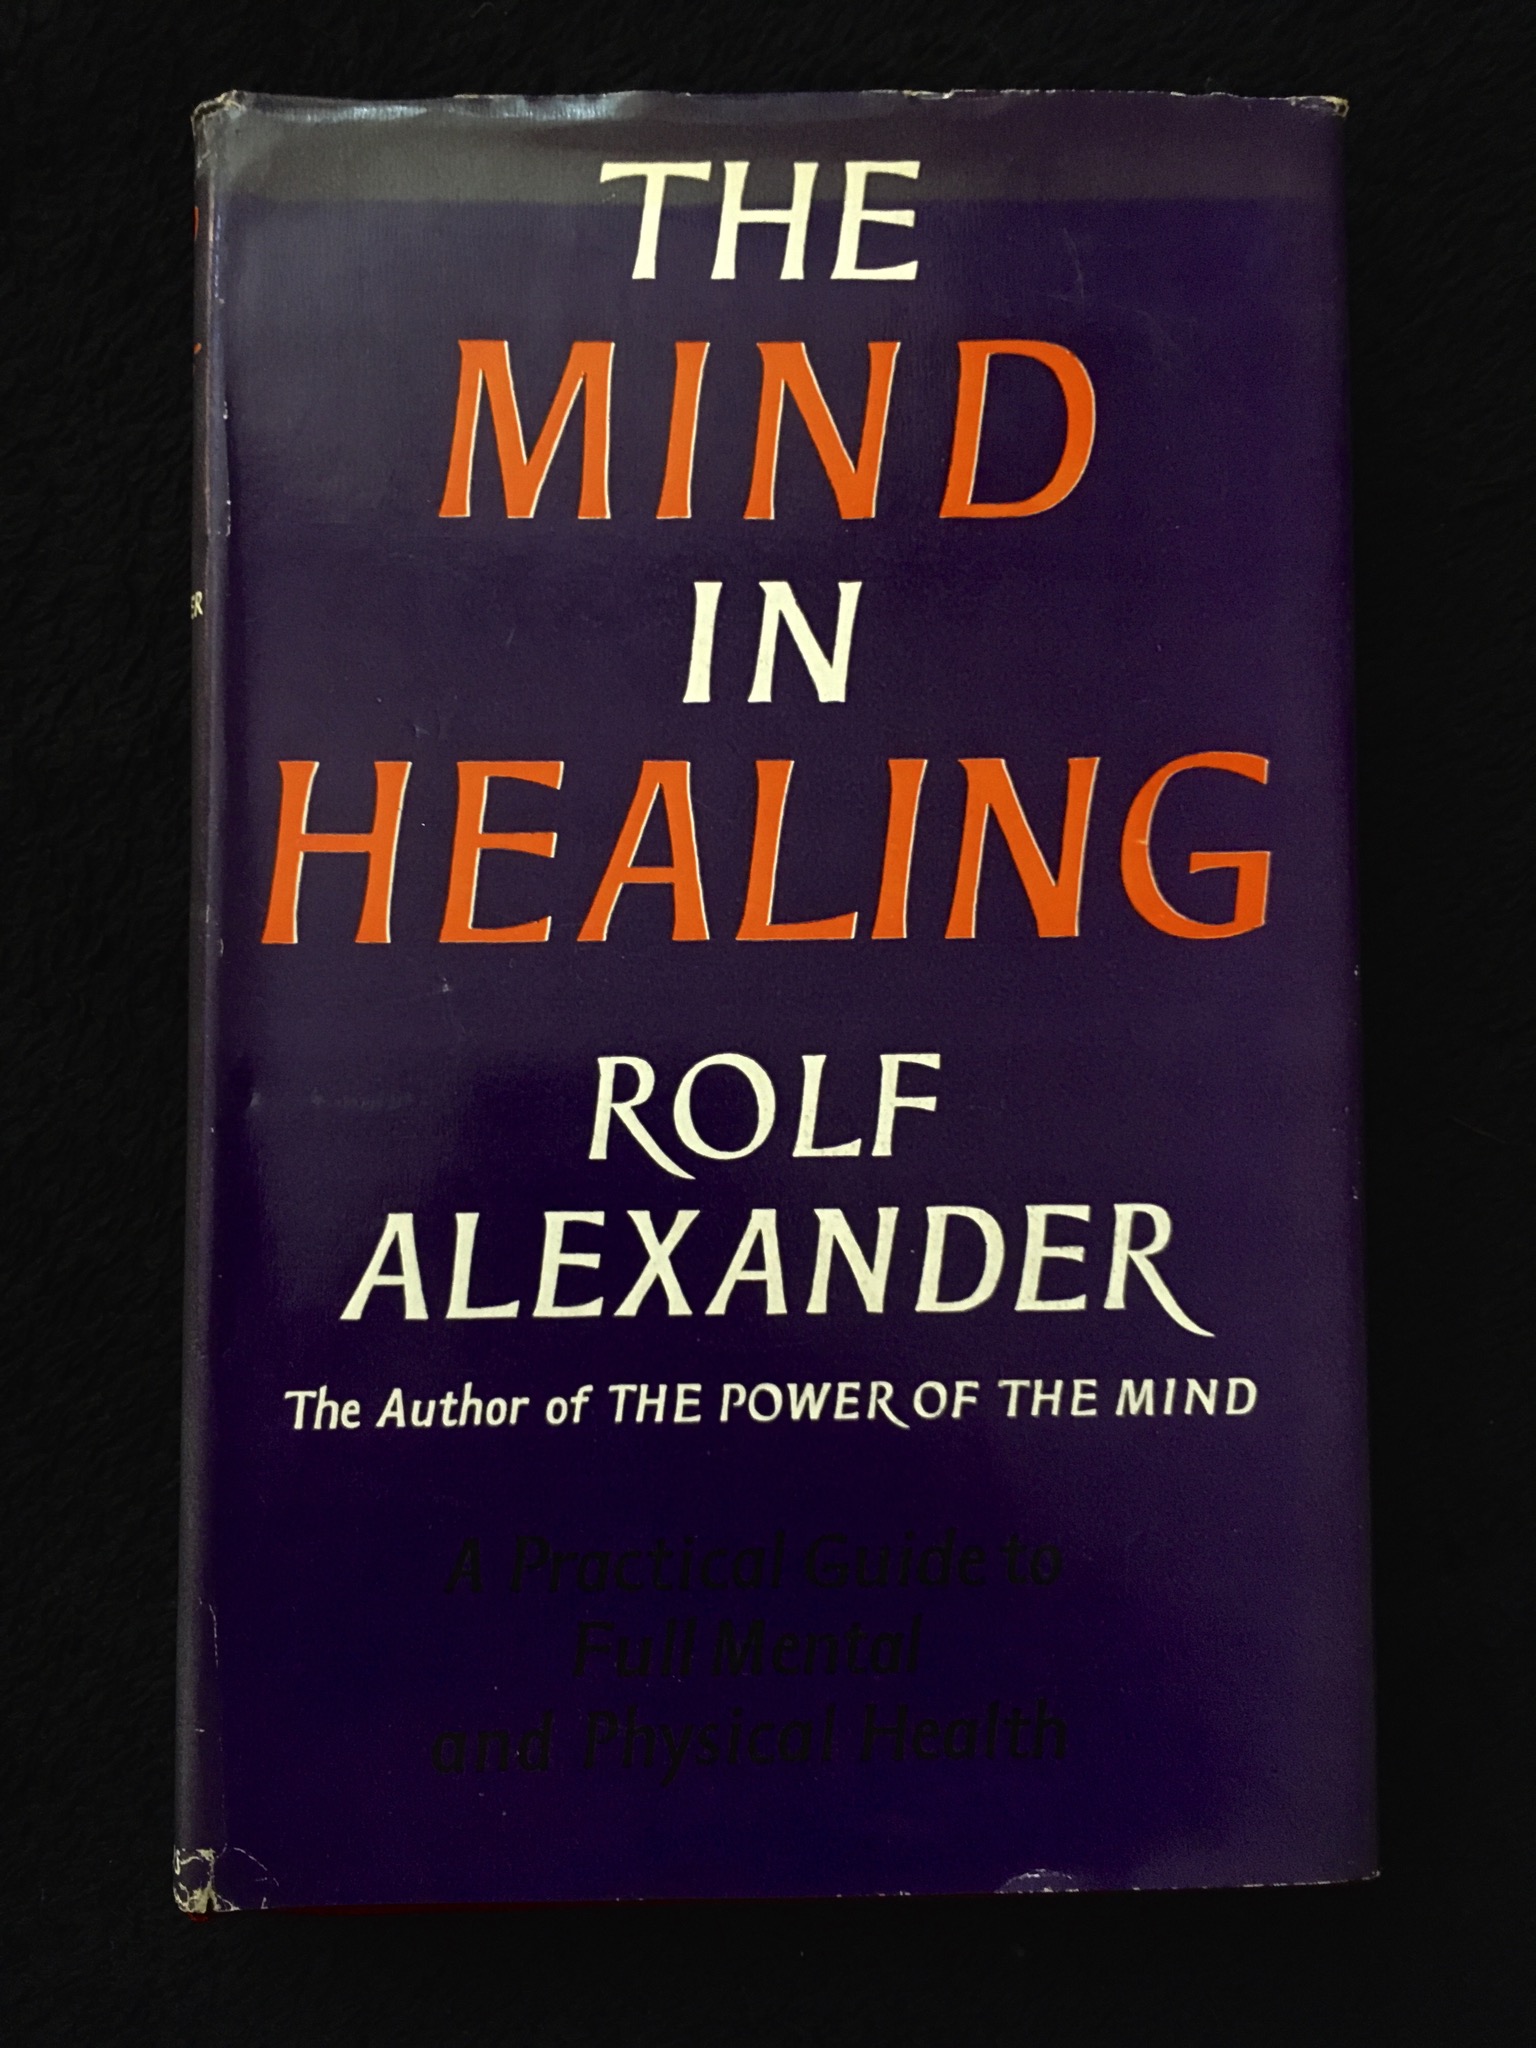 The Mind In Healing by Rolf Alexander